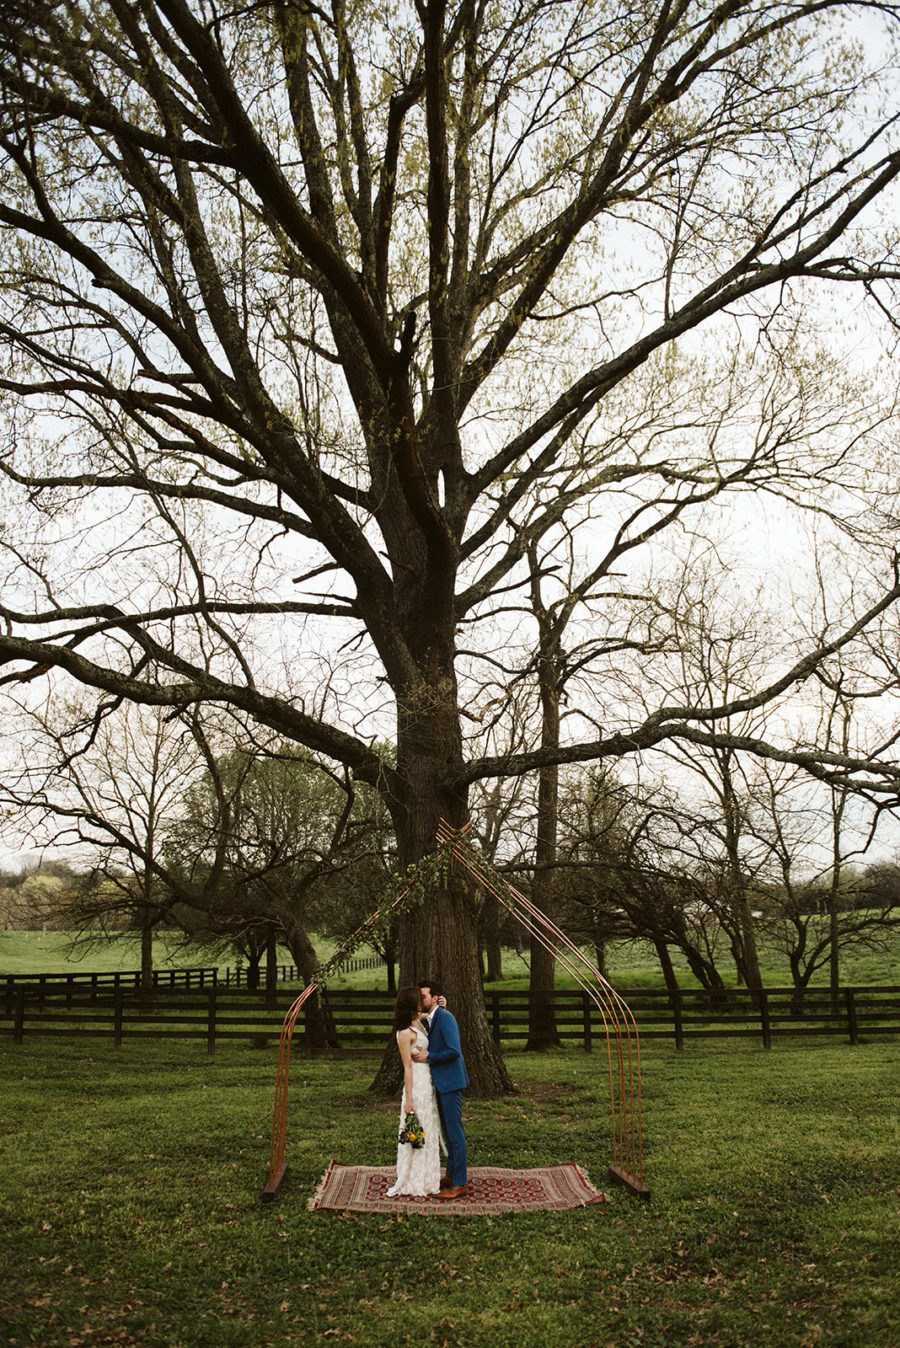 Meagan Lawler Photography featured on Nashville Bride Guide